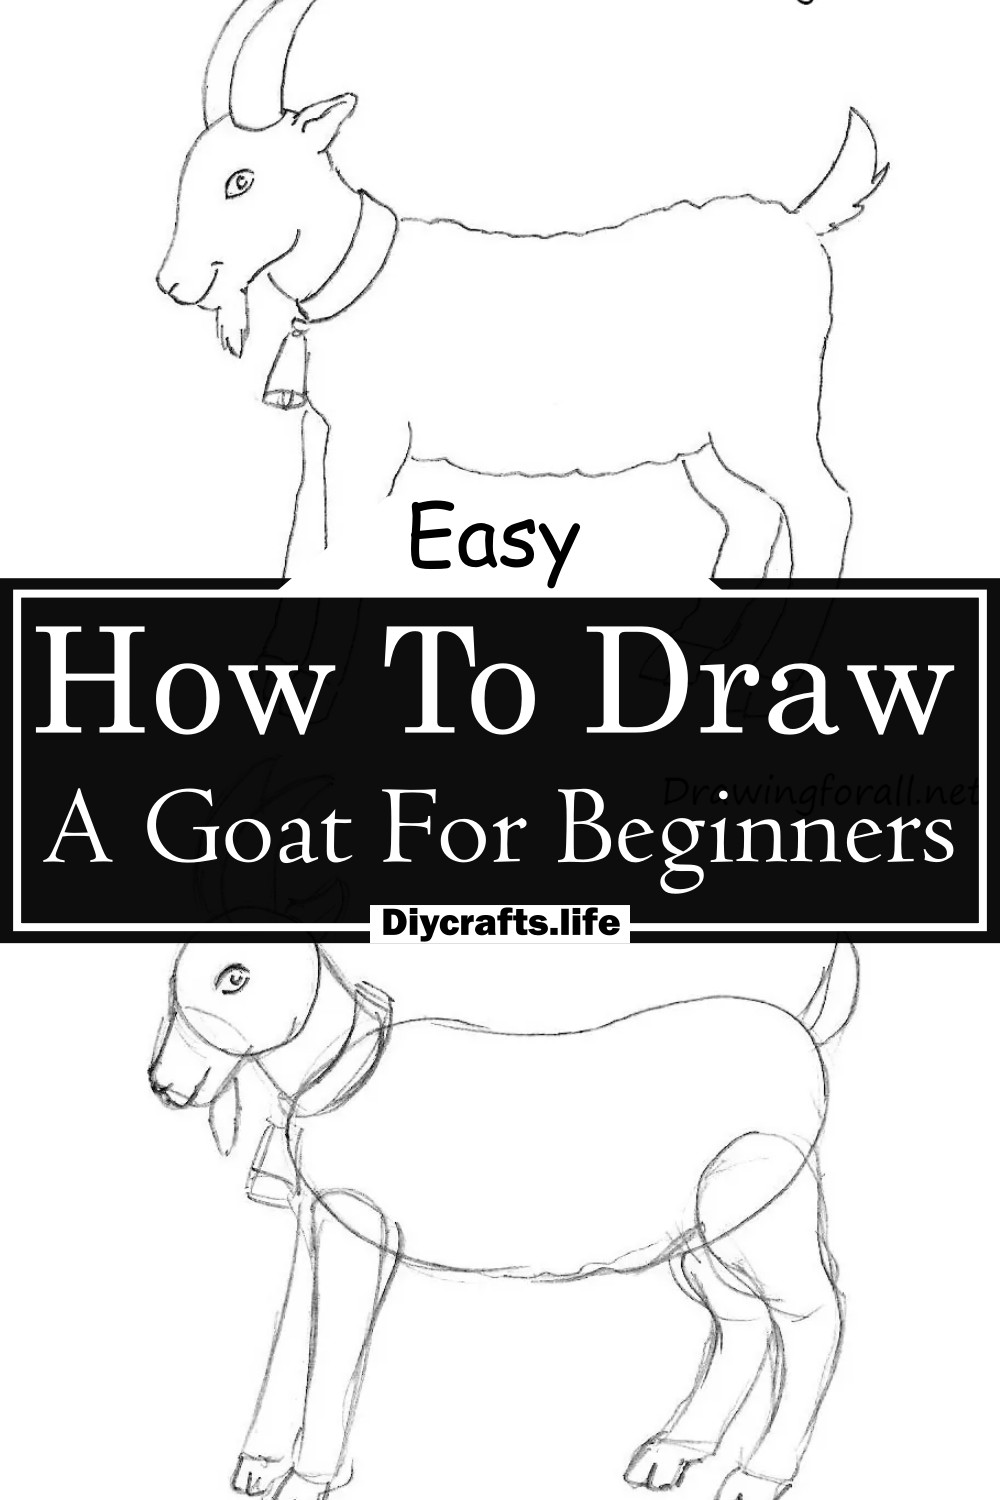 How To Draw A Goat For Beginners